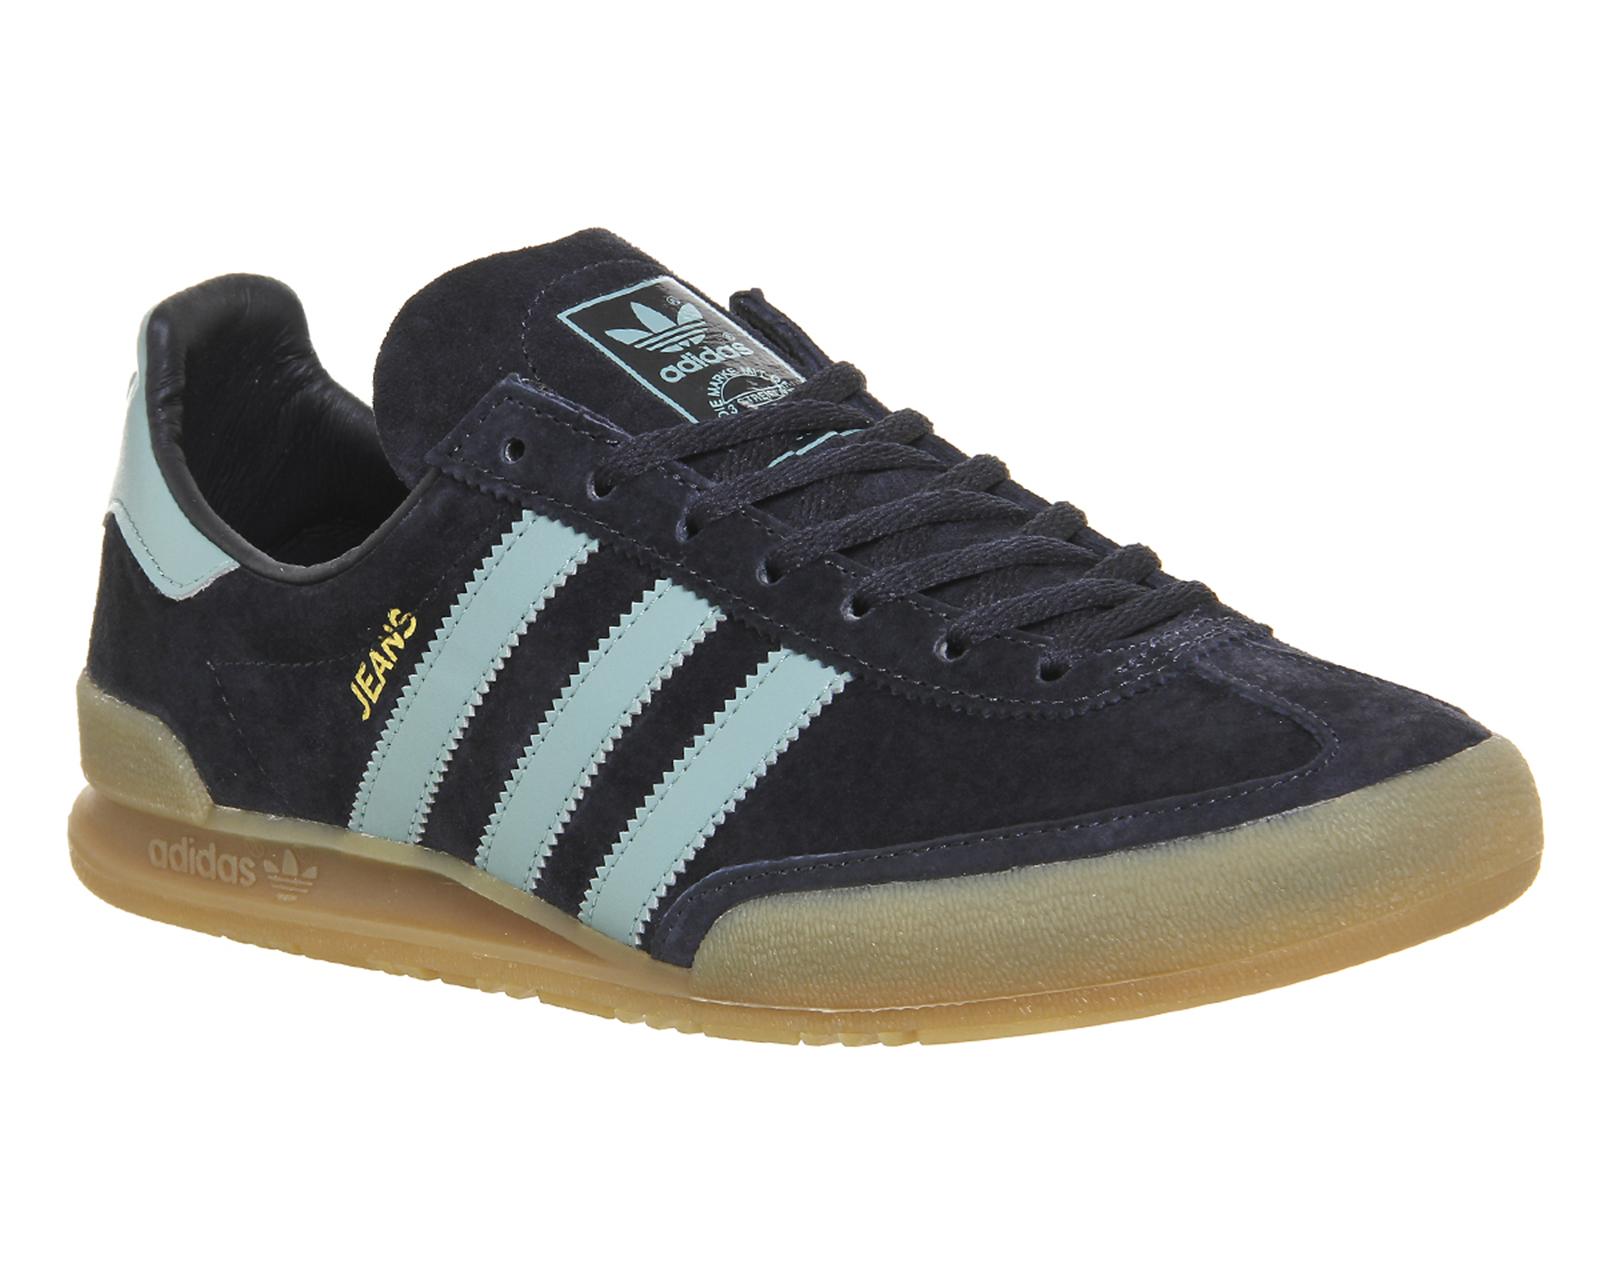 Lyst - Adidas Originals Jeans Trainers in Blue for Men